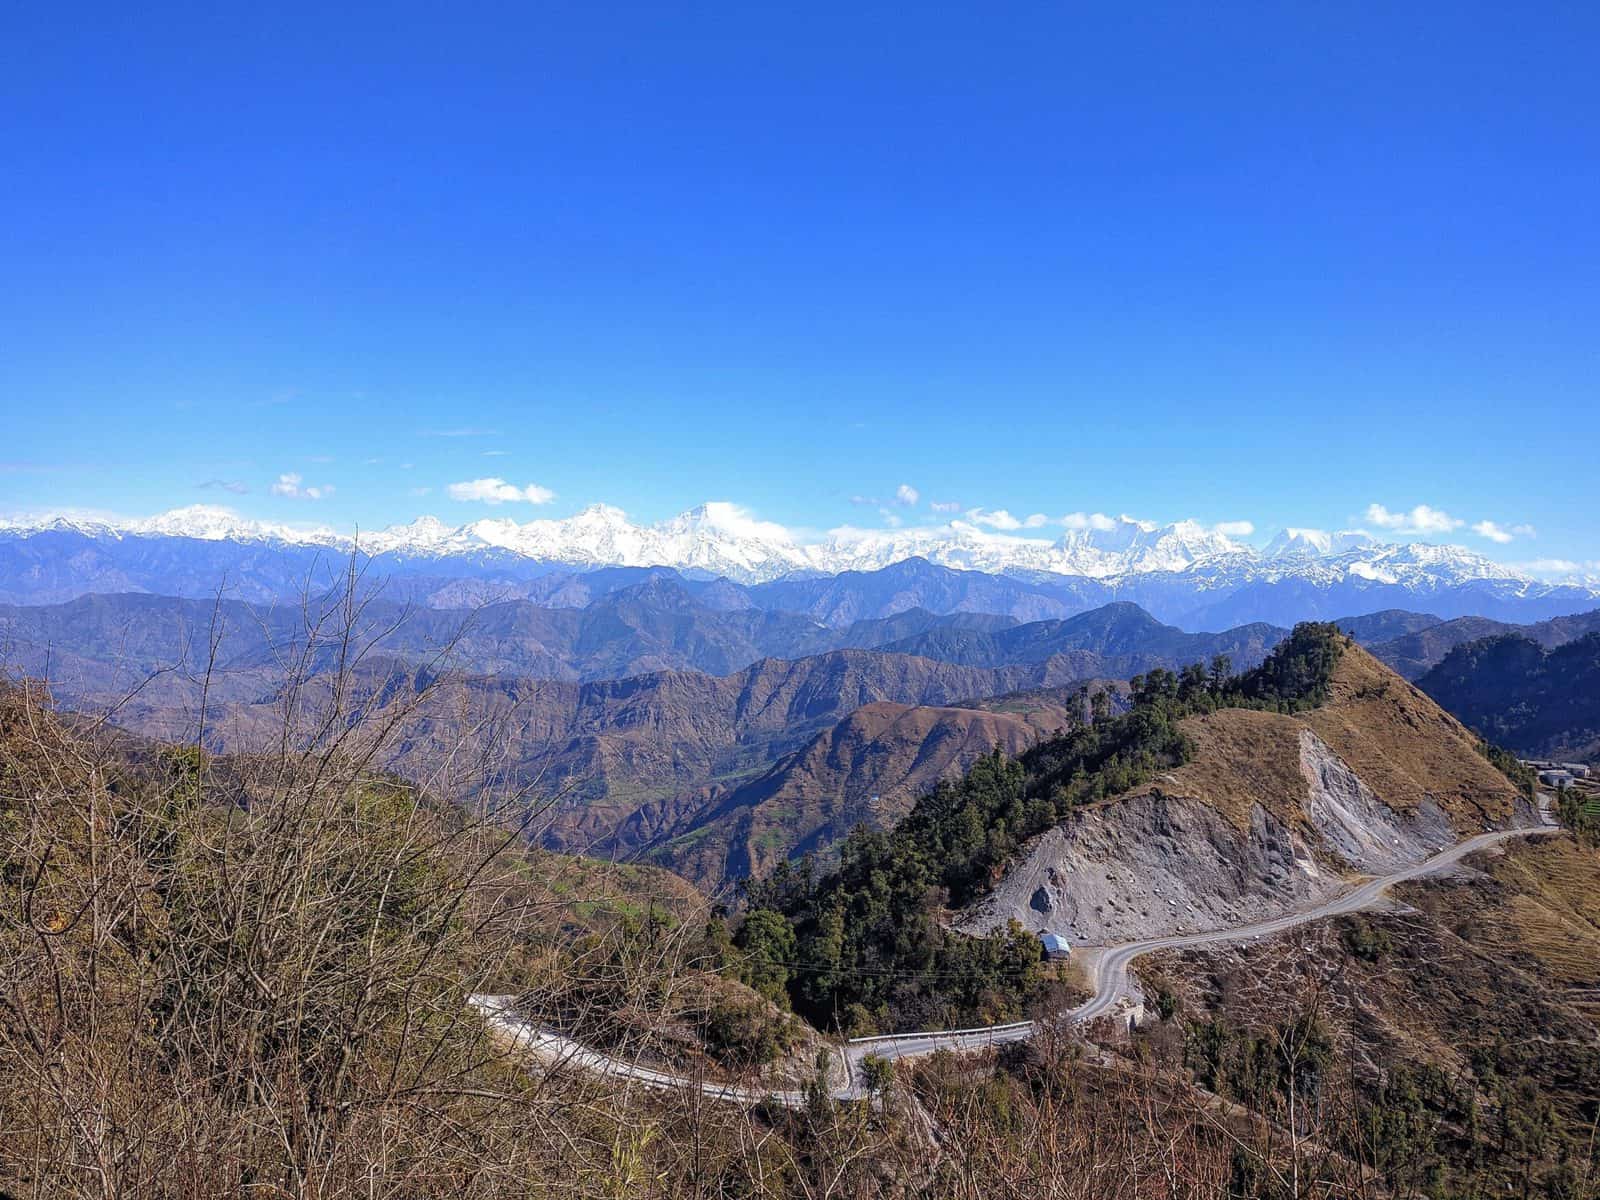 Mountains carved just above Jay Prithvi Highway in Bajhang district of Sudurpaschim province to build a road